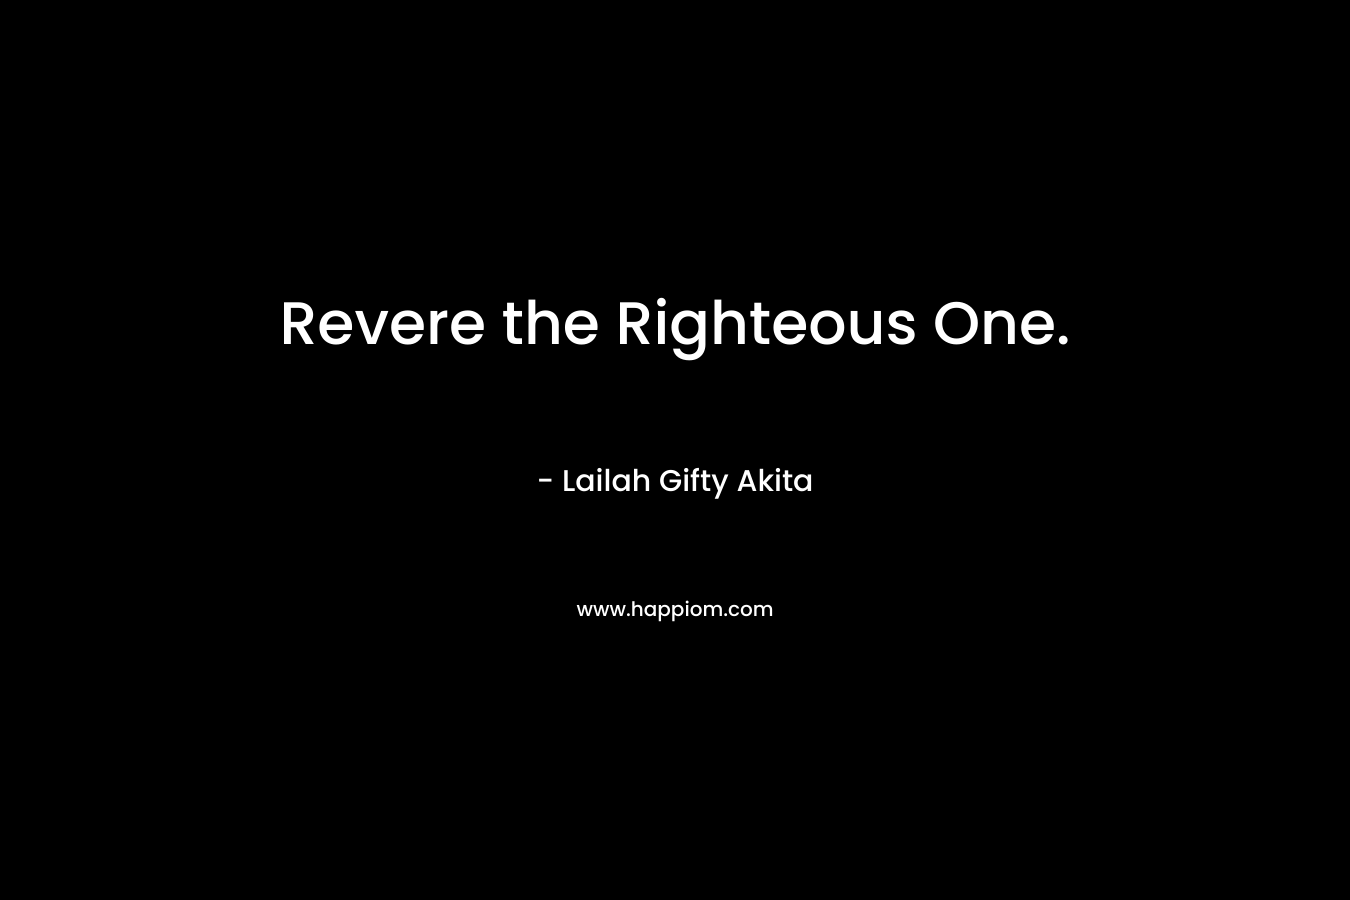 Revere the Righteous One. – Lailah Gifty Akita